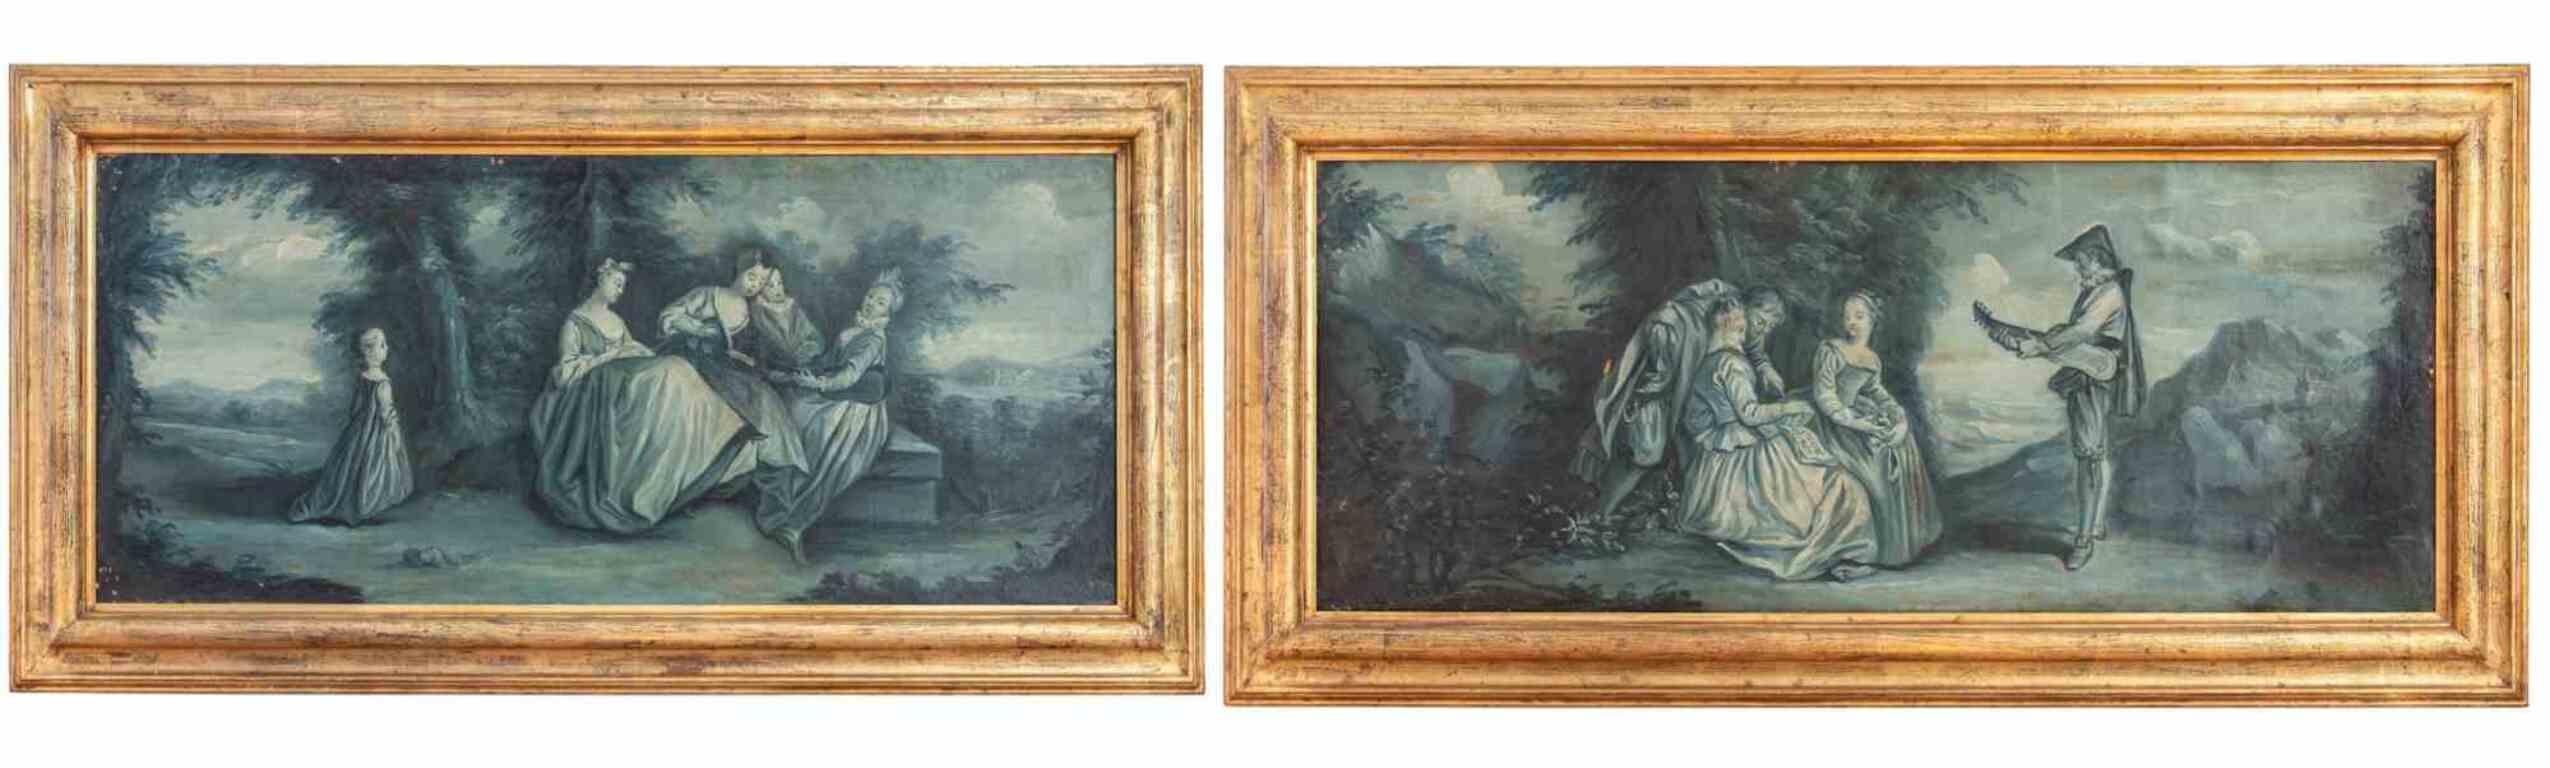 Unknown Landscape Painting - Pair of Gallant Scenes - Oil on Canvas - 18th Century